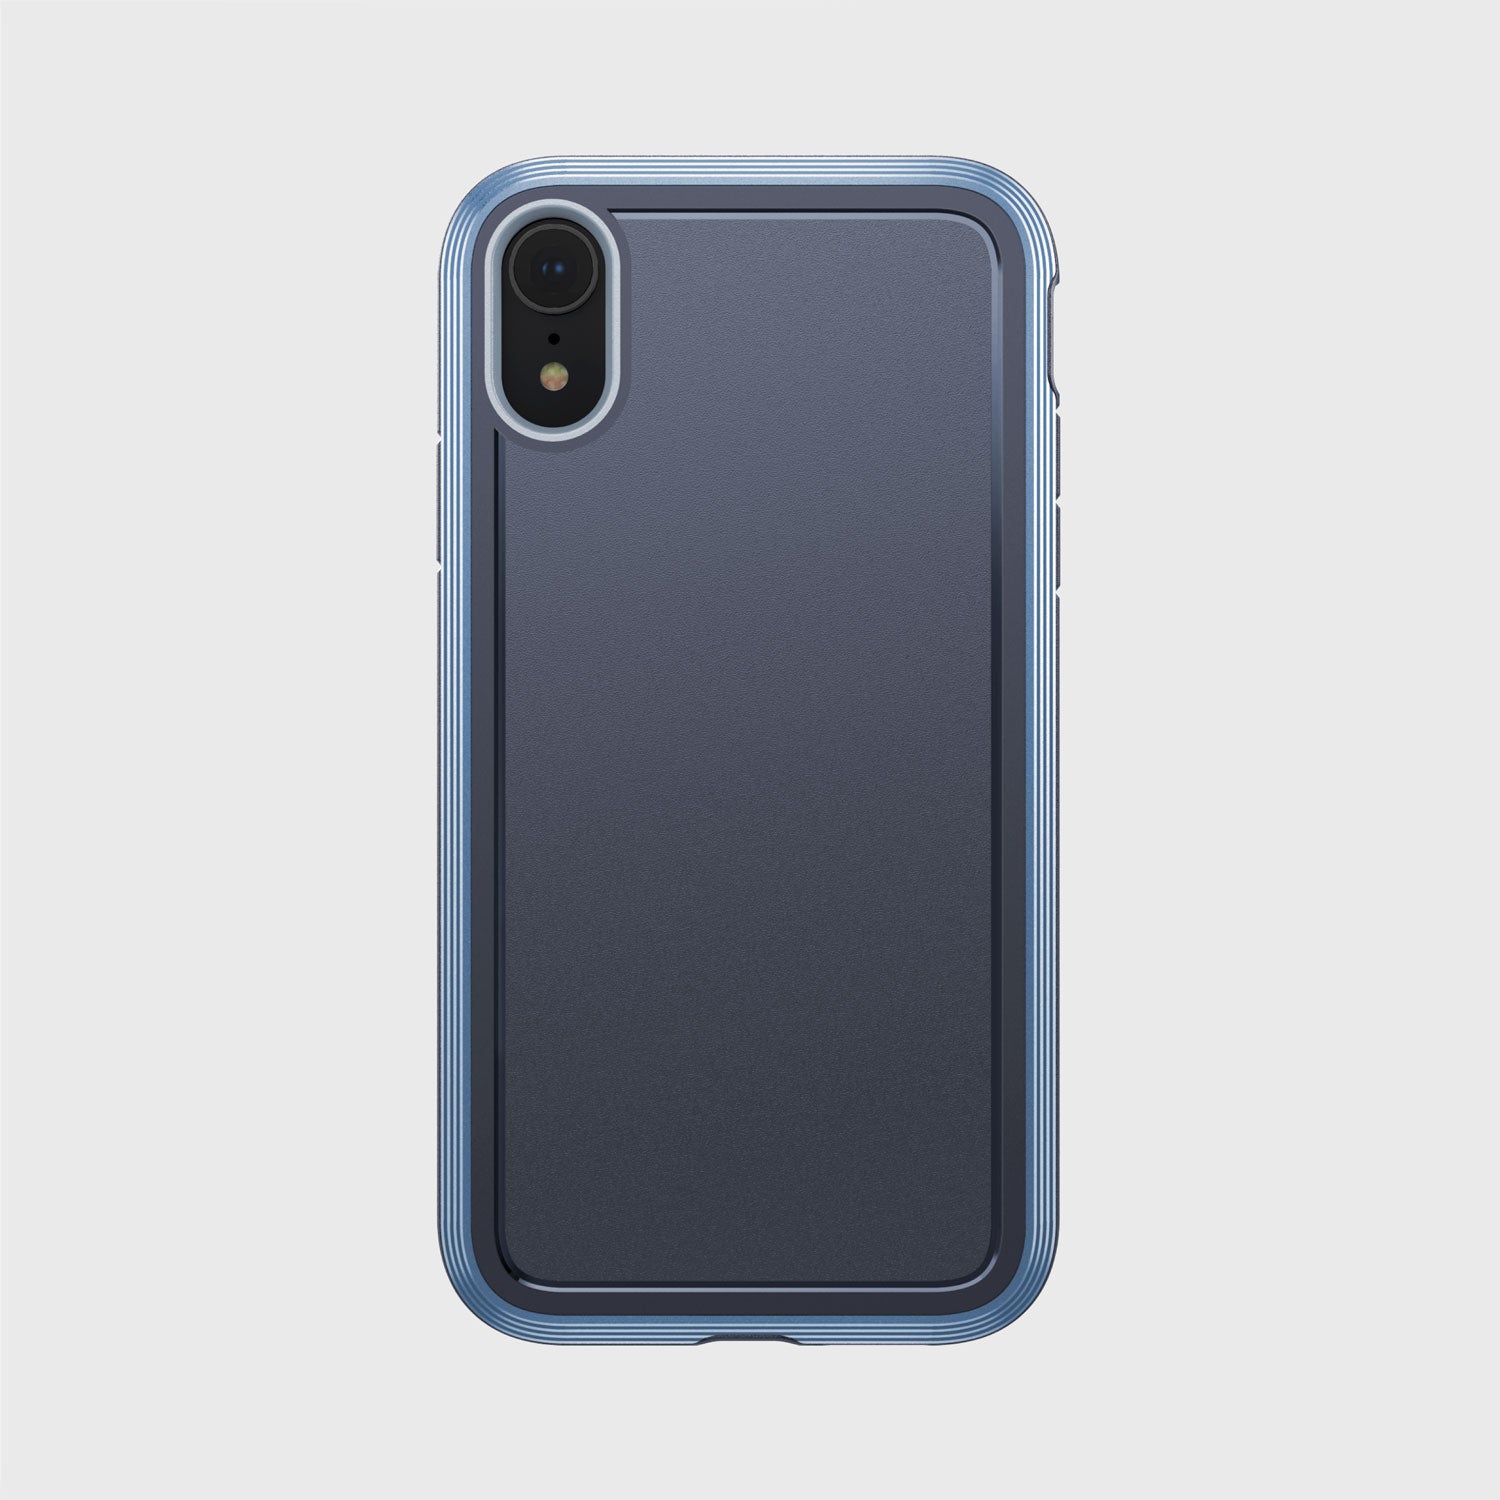 A Raptic ULTRA case, offering device protection, for the iPhone XR on a white background.